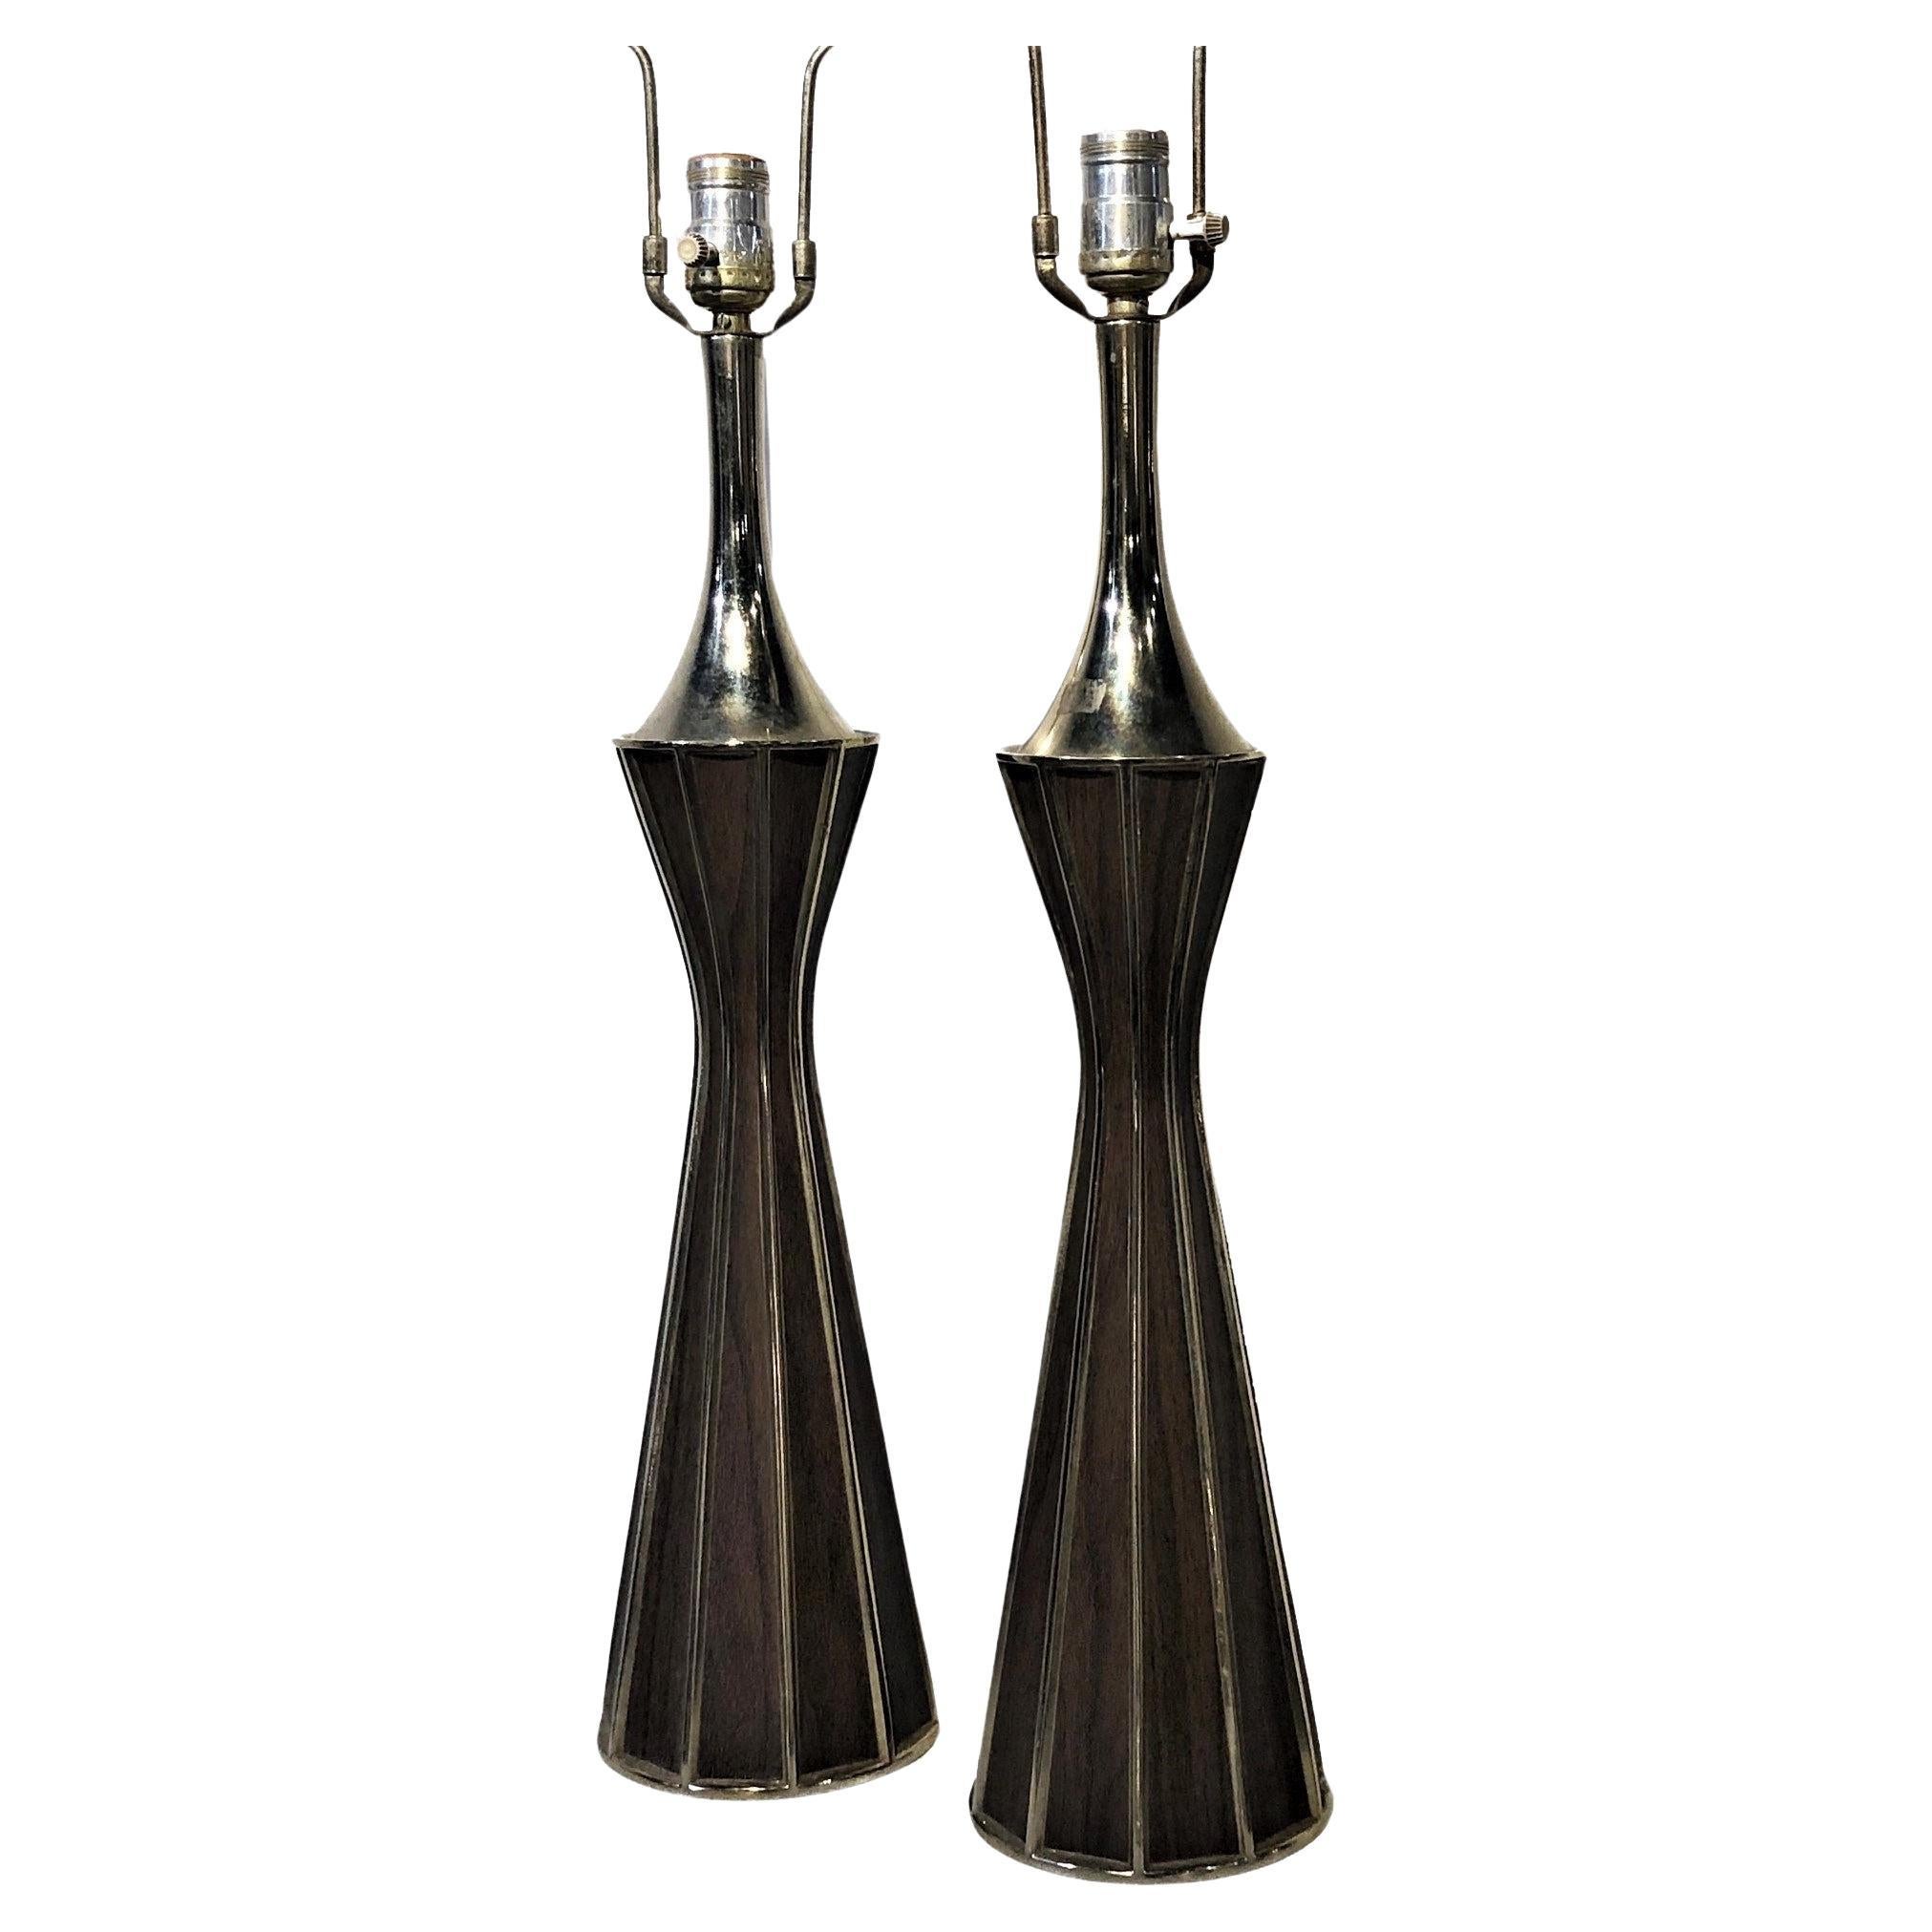 A Pair of Modernist Brass and Wood Lamps in Mastercraft Style, ca. 1960s